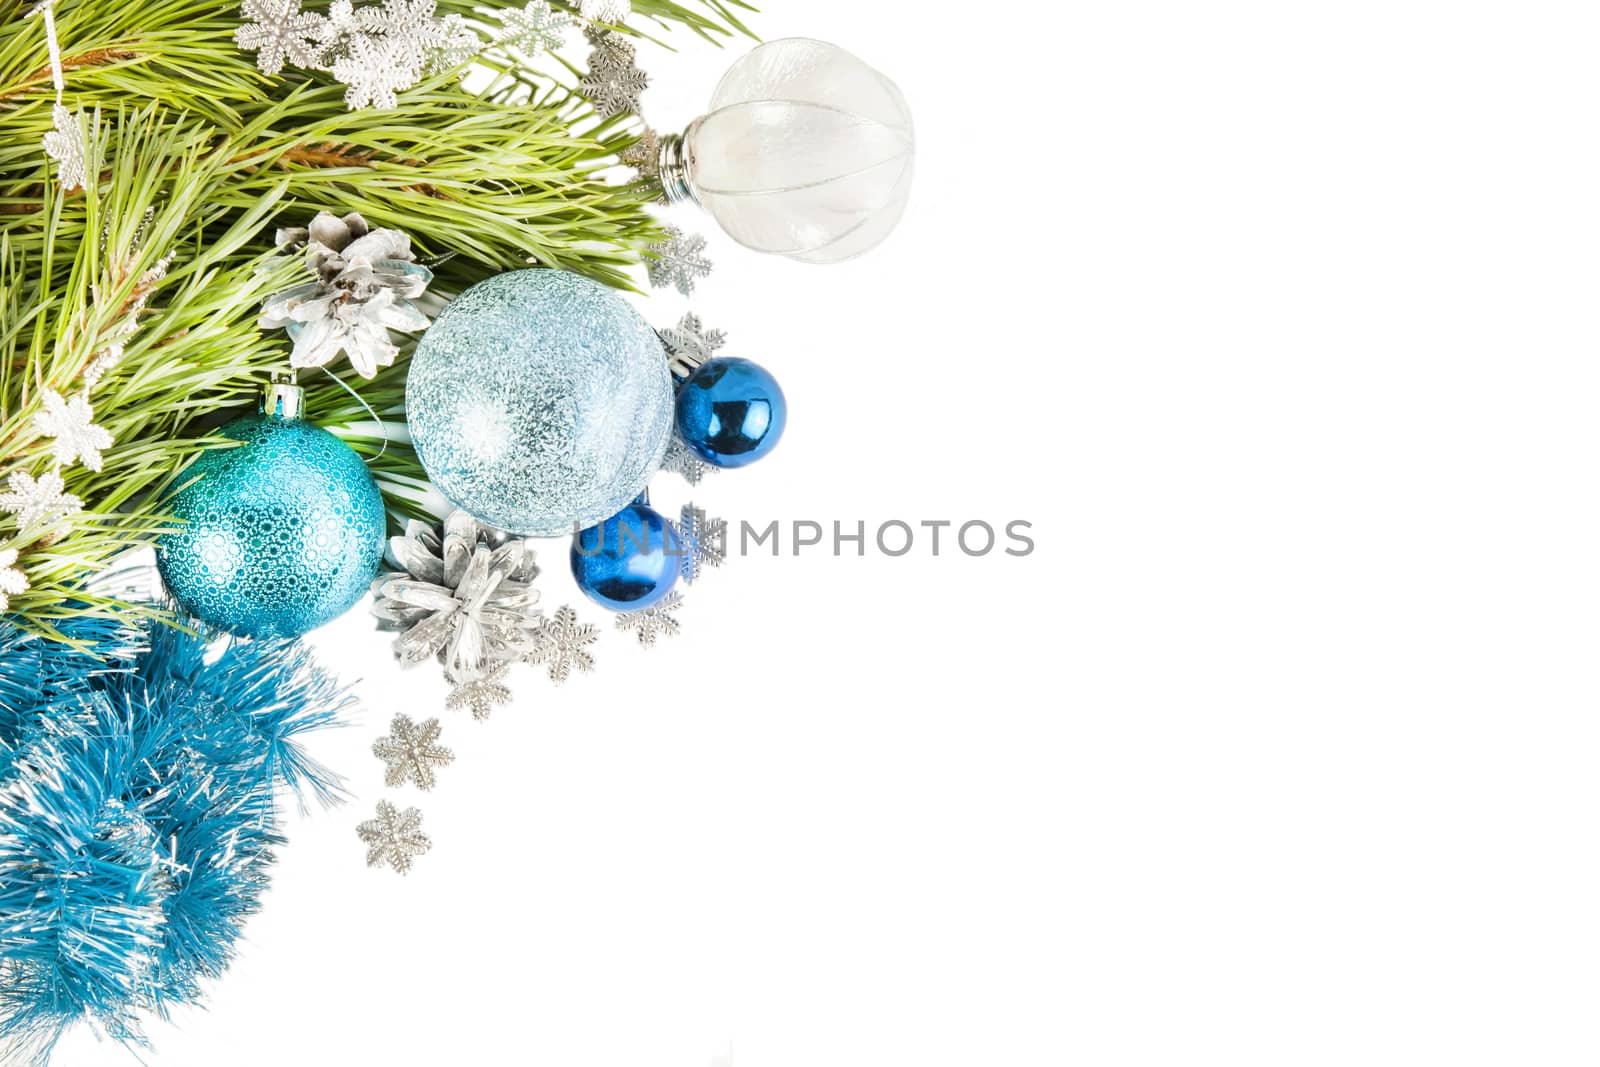 New Year composition with fir tree branch and cones with blue ba by RawGroup